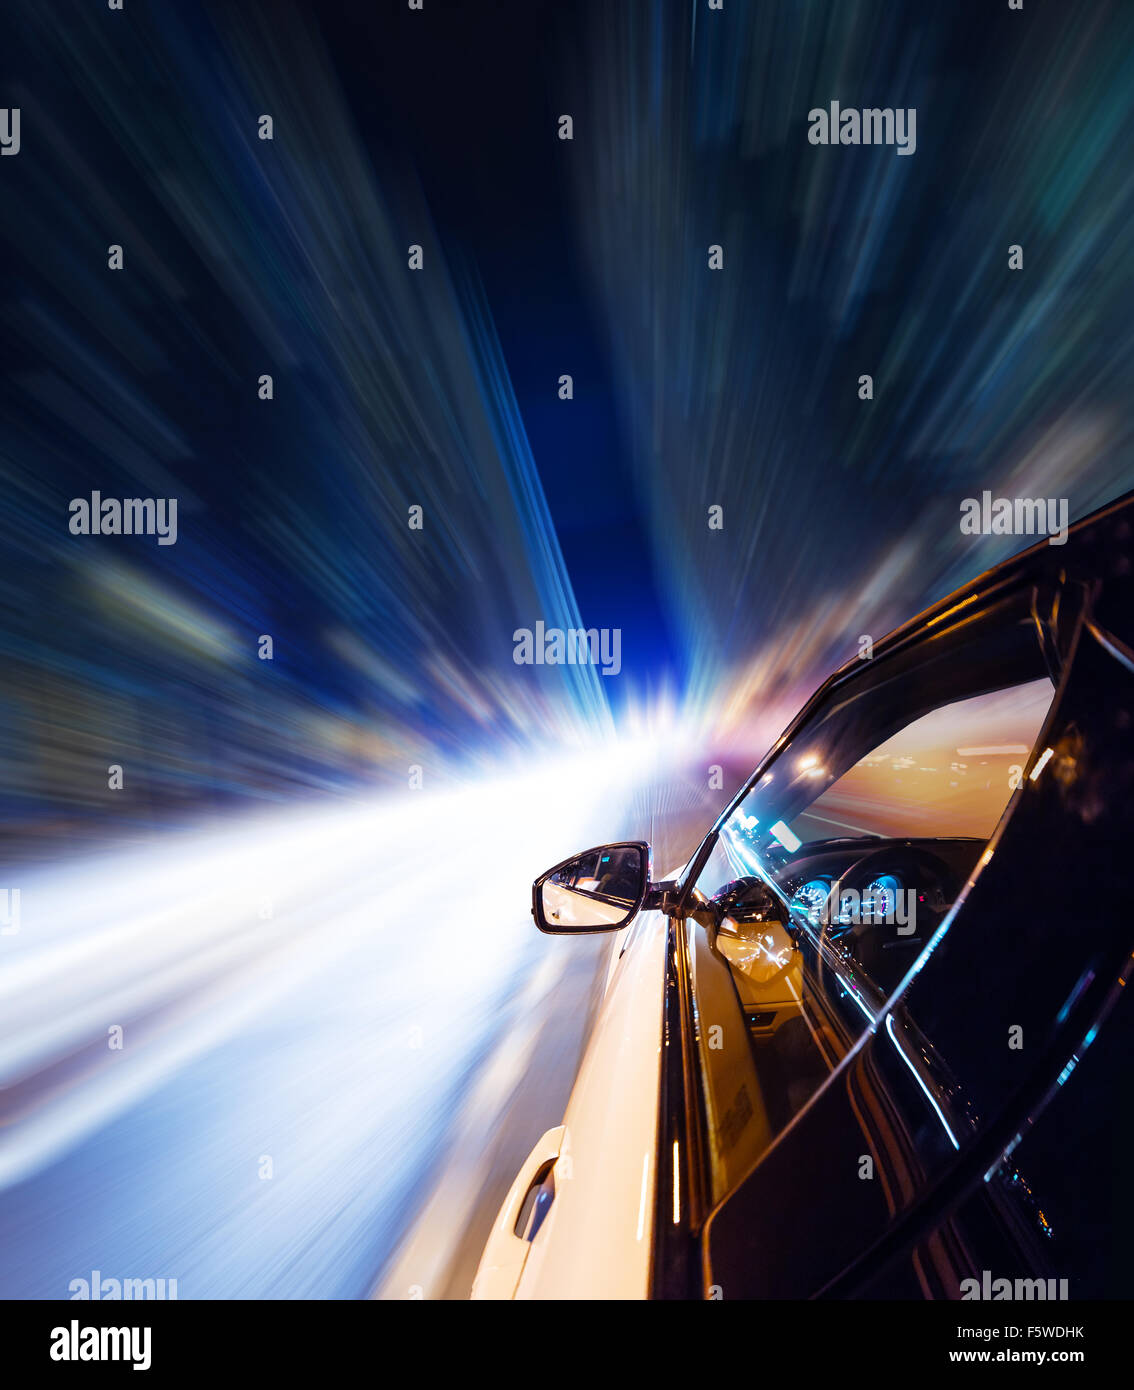 Car driving at night city with blur motion Stock Photo